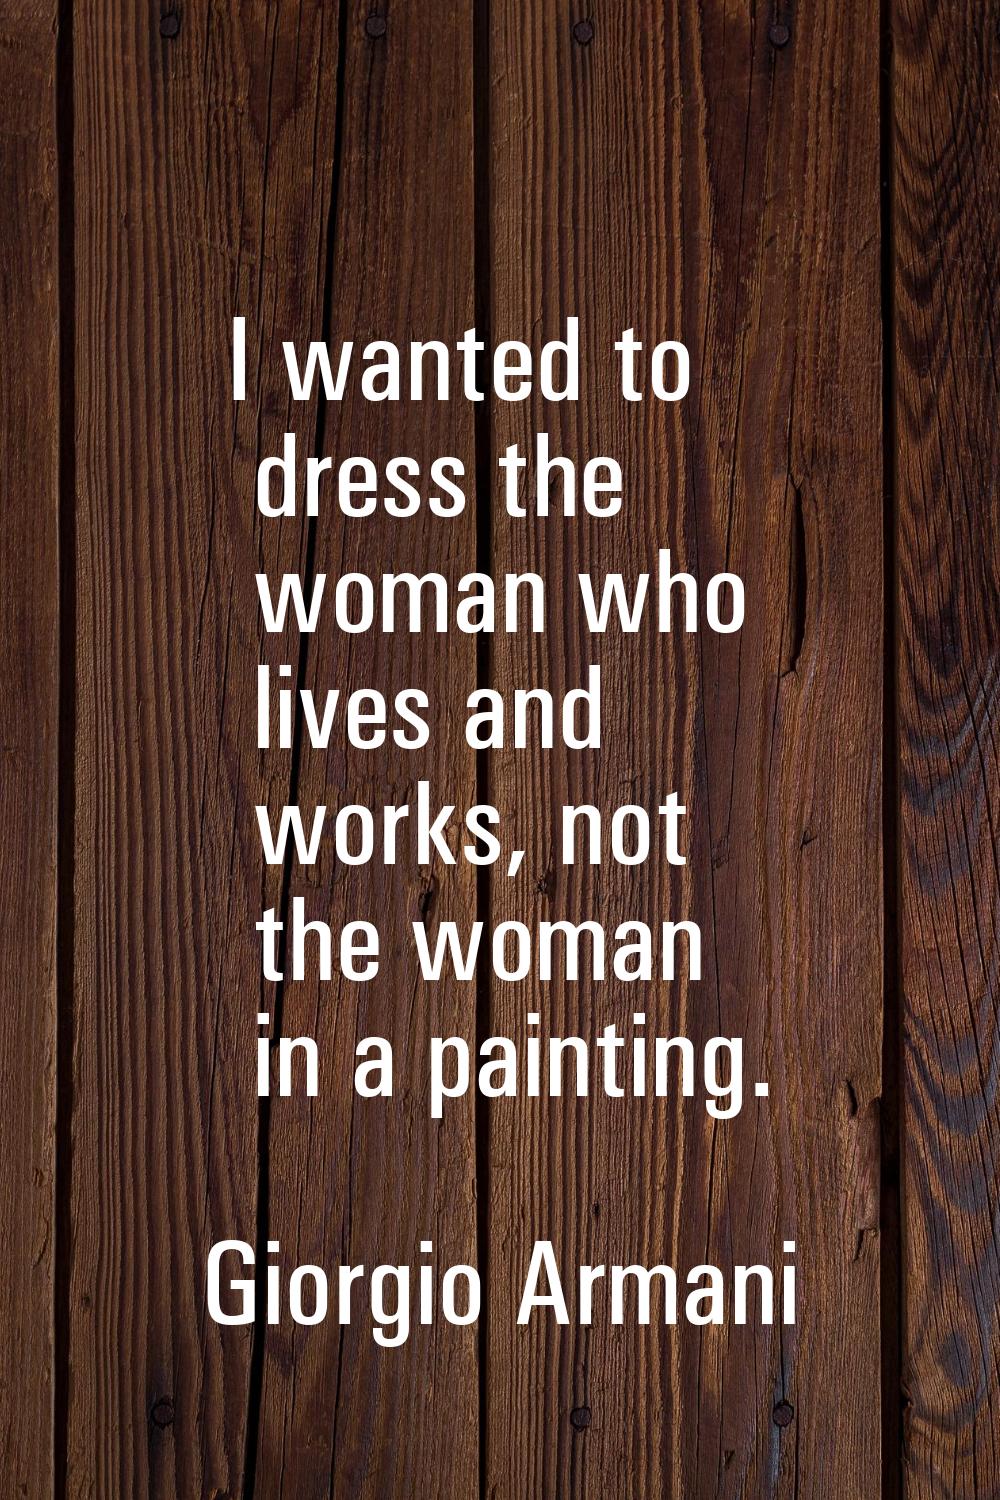 I wanted to dress the woman who lives and works, not the woman in a painting.